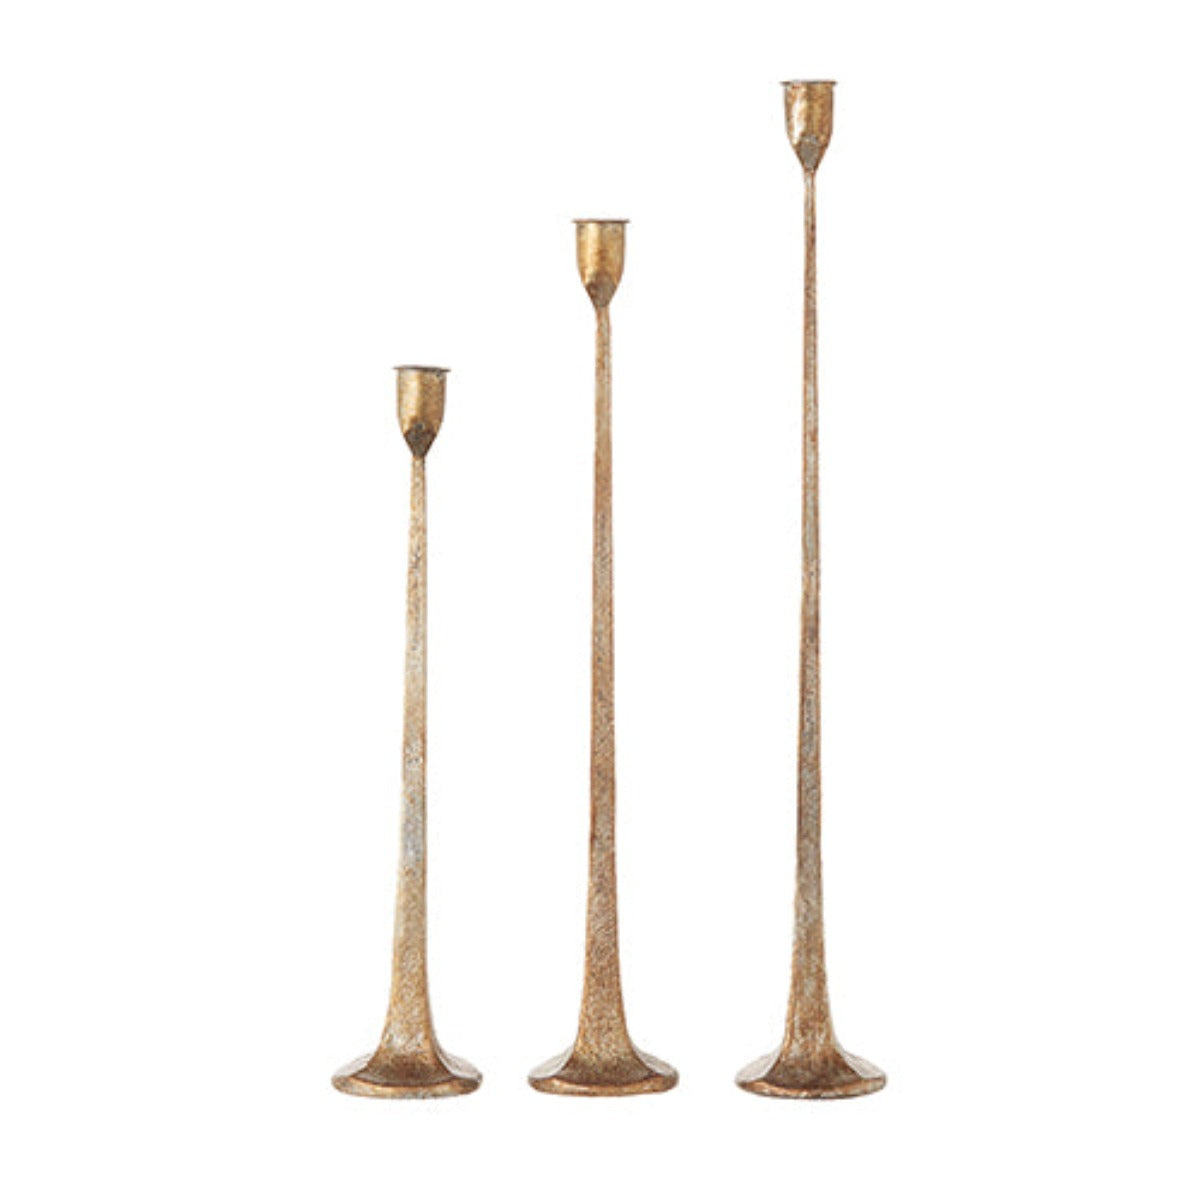 Antique Brass Trumpet Taper Candle Holders Set Of 3 By Kalalou